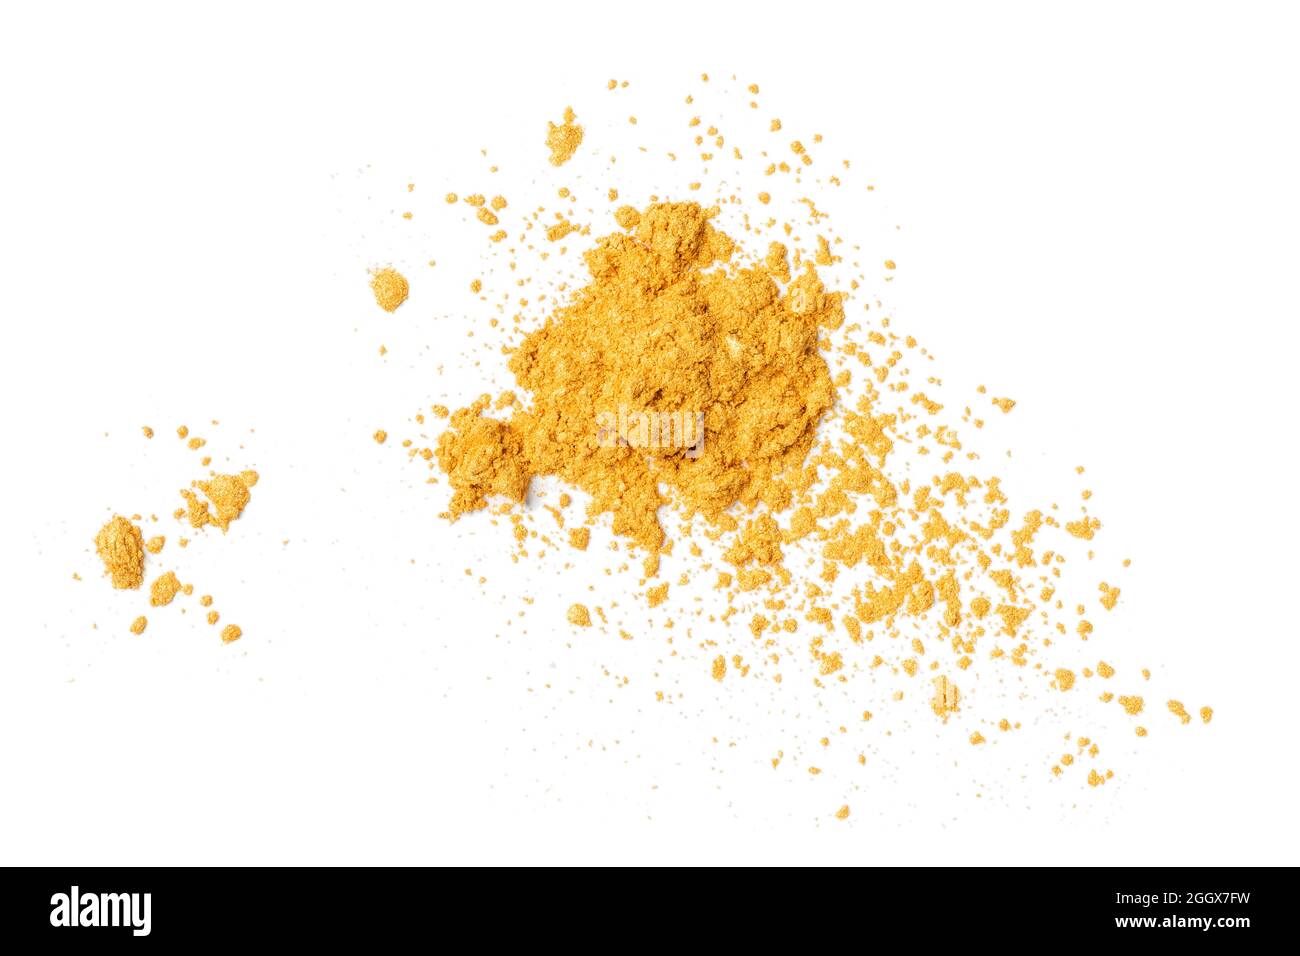 Heap of gold powder dust isolated on white background Stock Photo